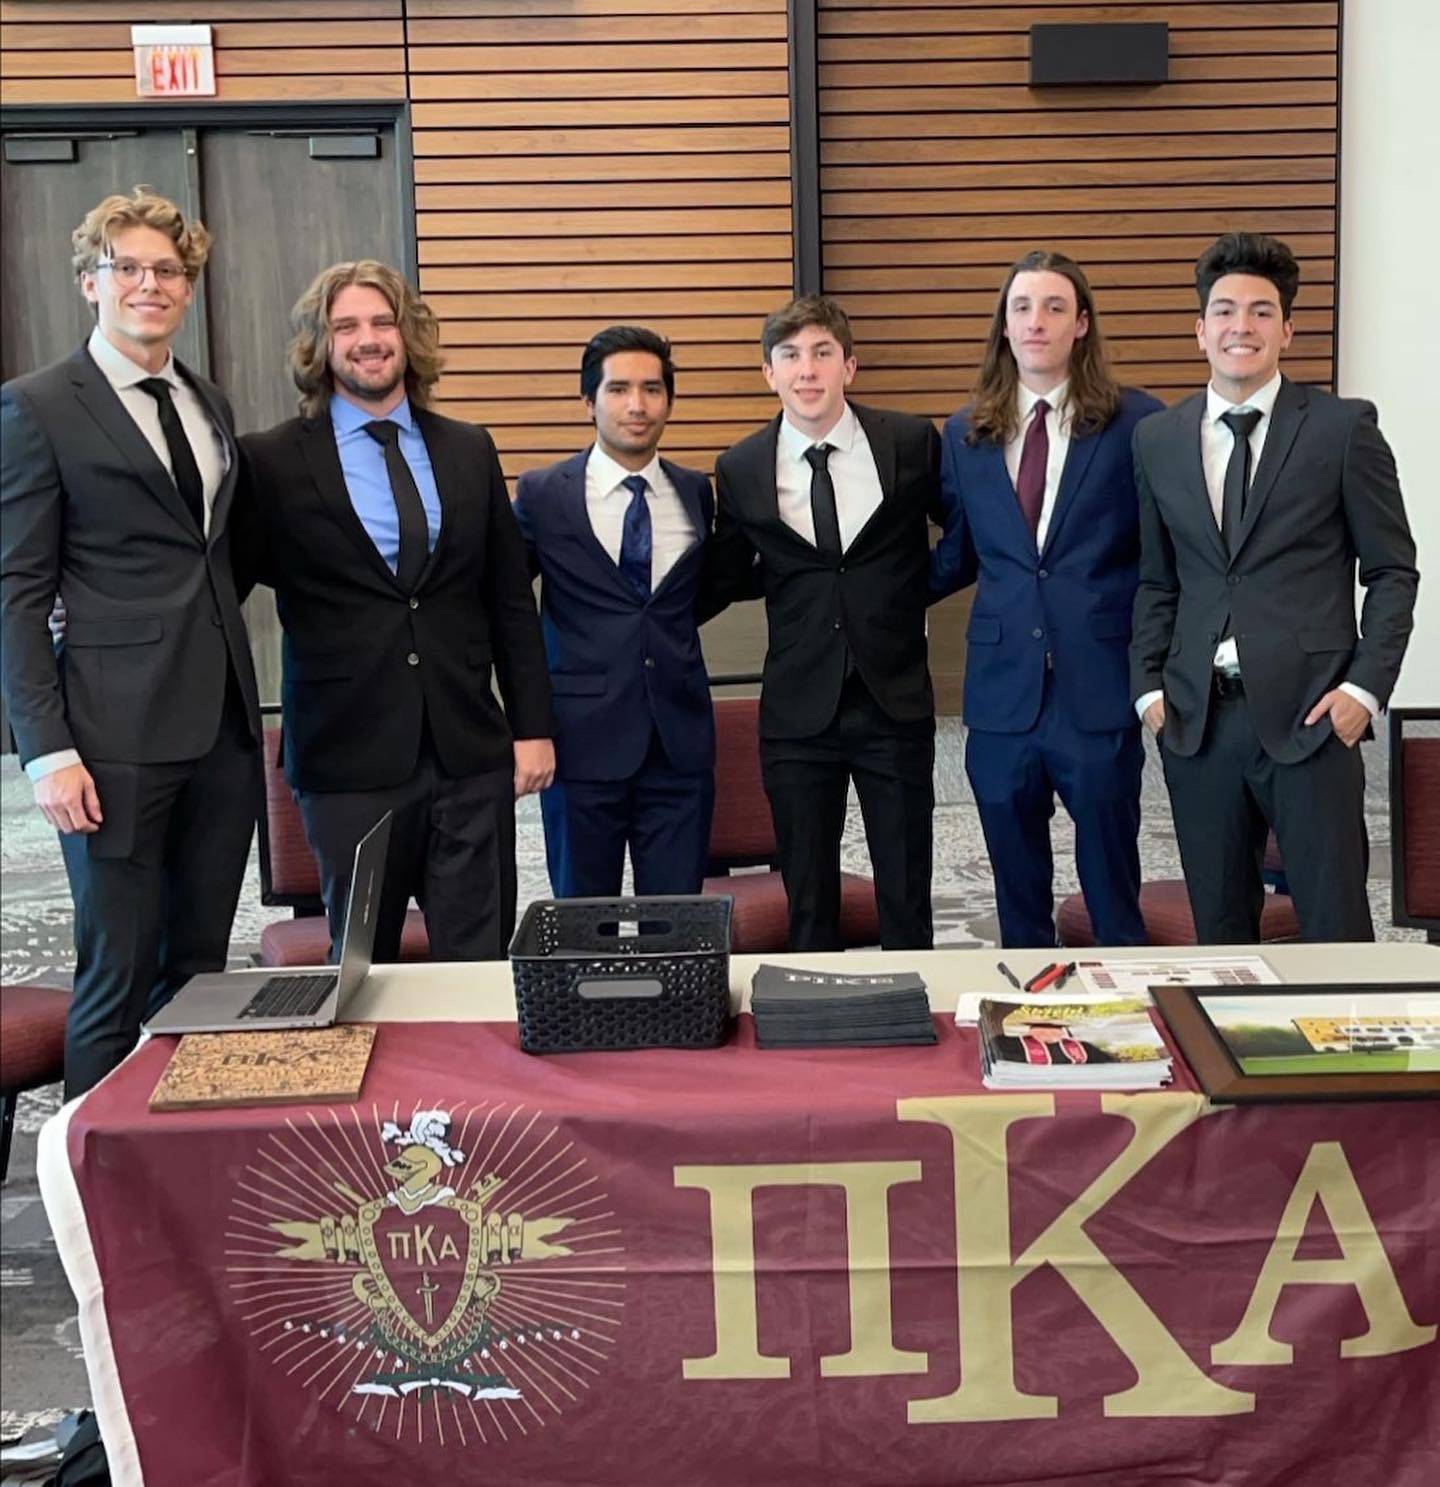 Six men of Pi Kappa Alpha stand behind their table/organization banner wearing suits with ties